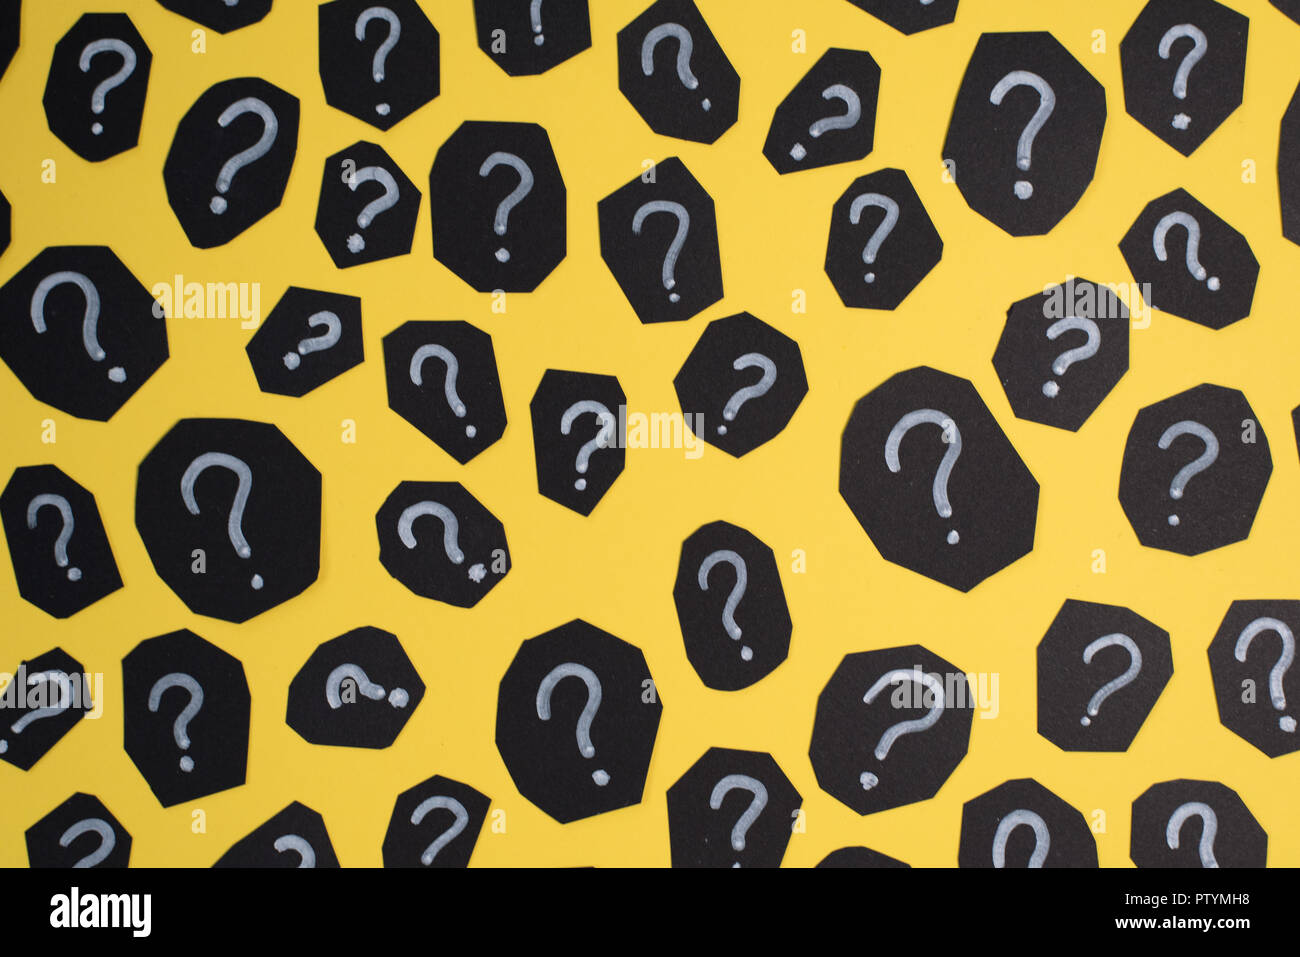 full frame image of black paper card with QUESTION MARK on yellow background. Concept of FAQ, Q&A, Problems and Questions background Stock Photo